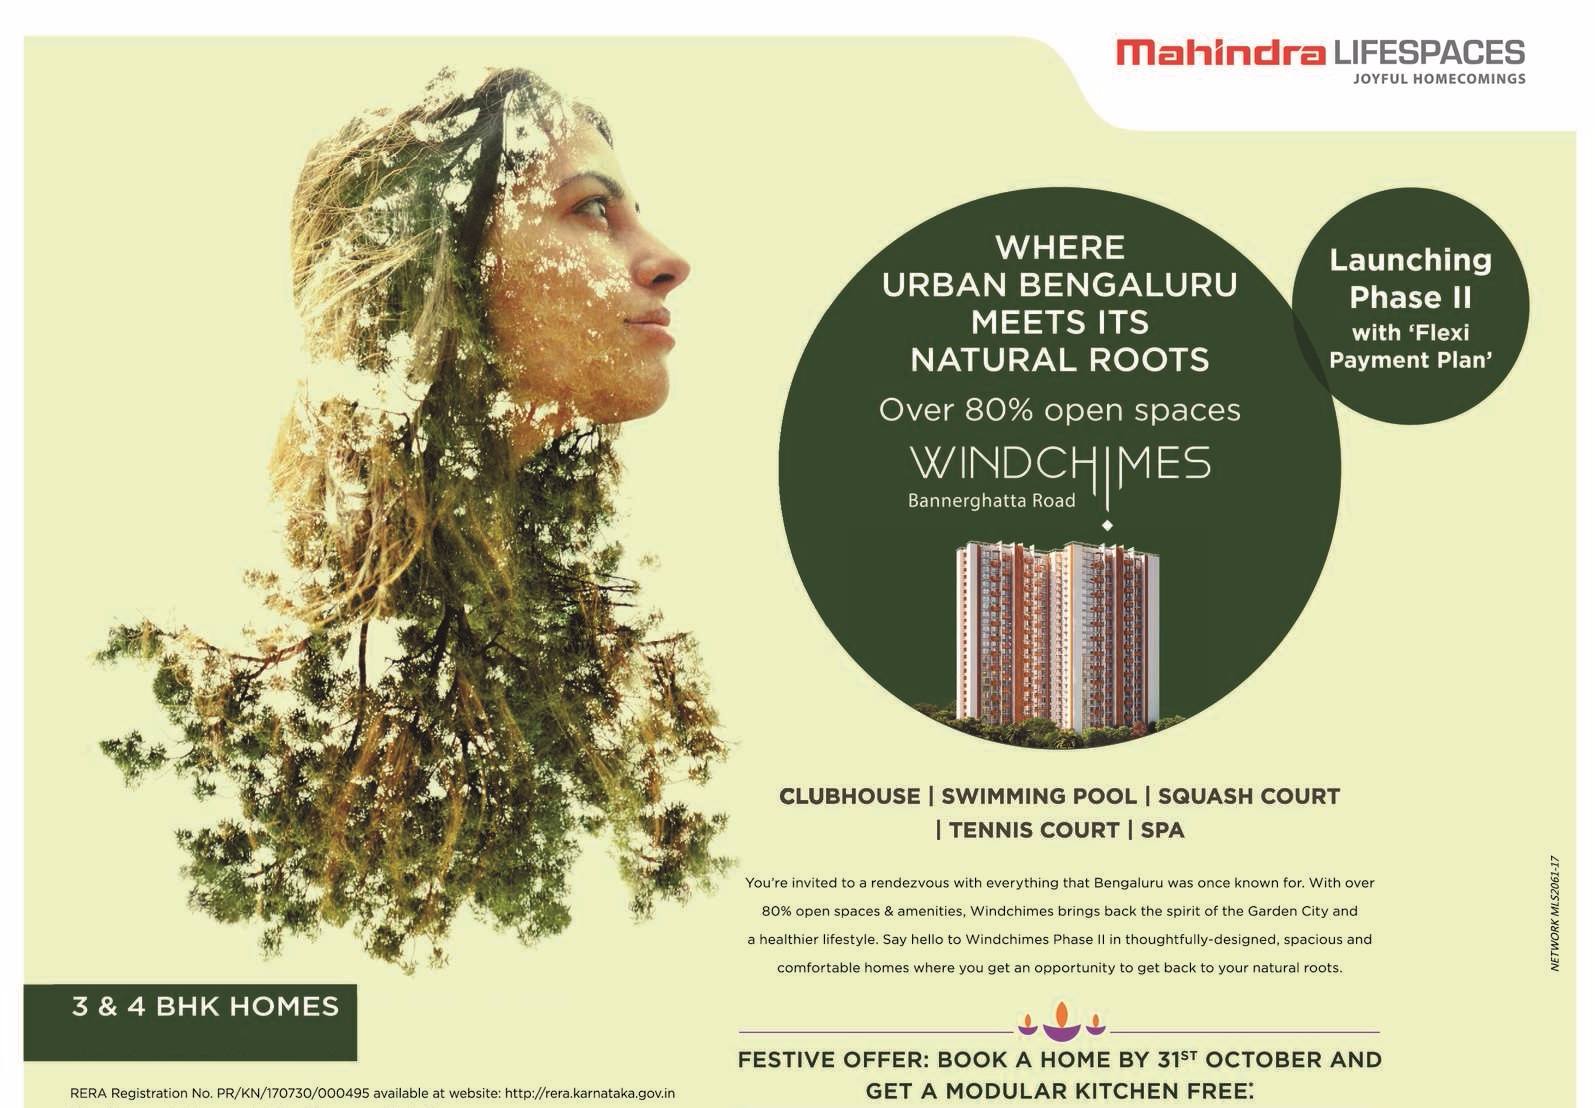 Book a home by 31st October and get a modular kitchen free at Mahindra Windchimes in Bangalore